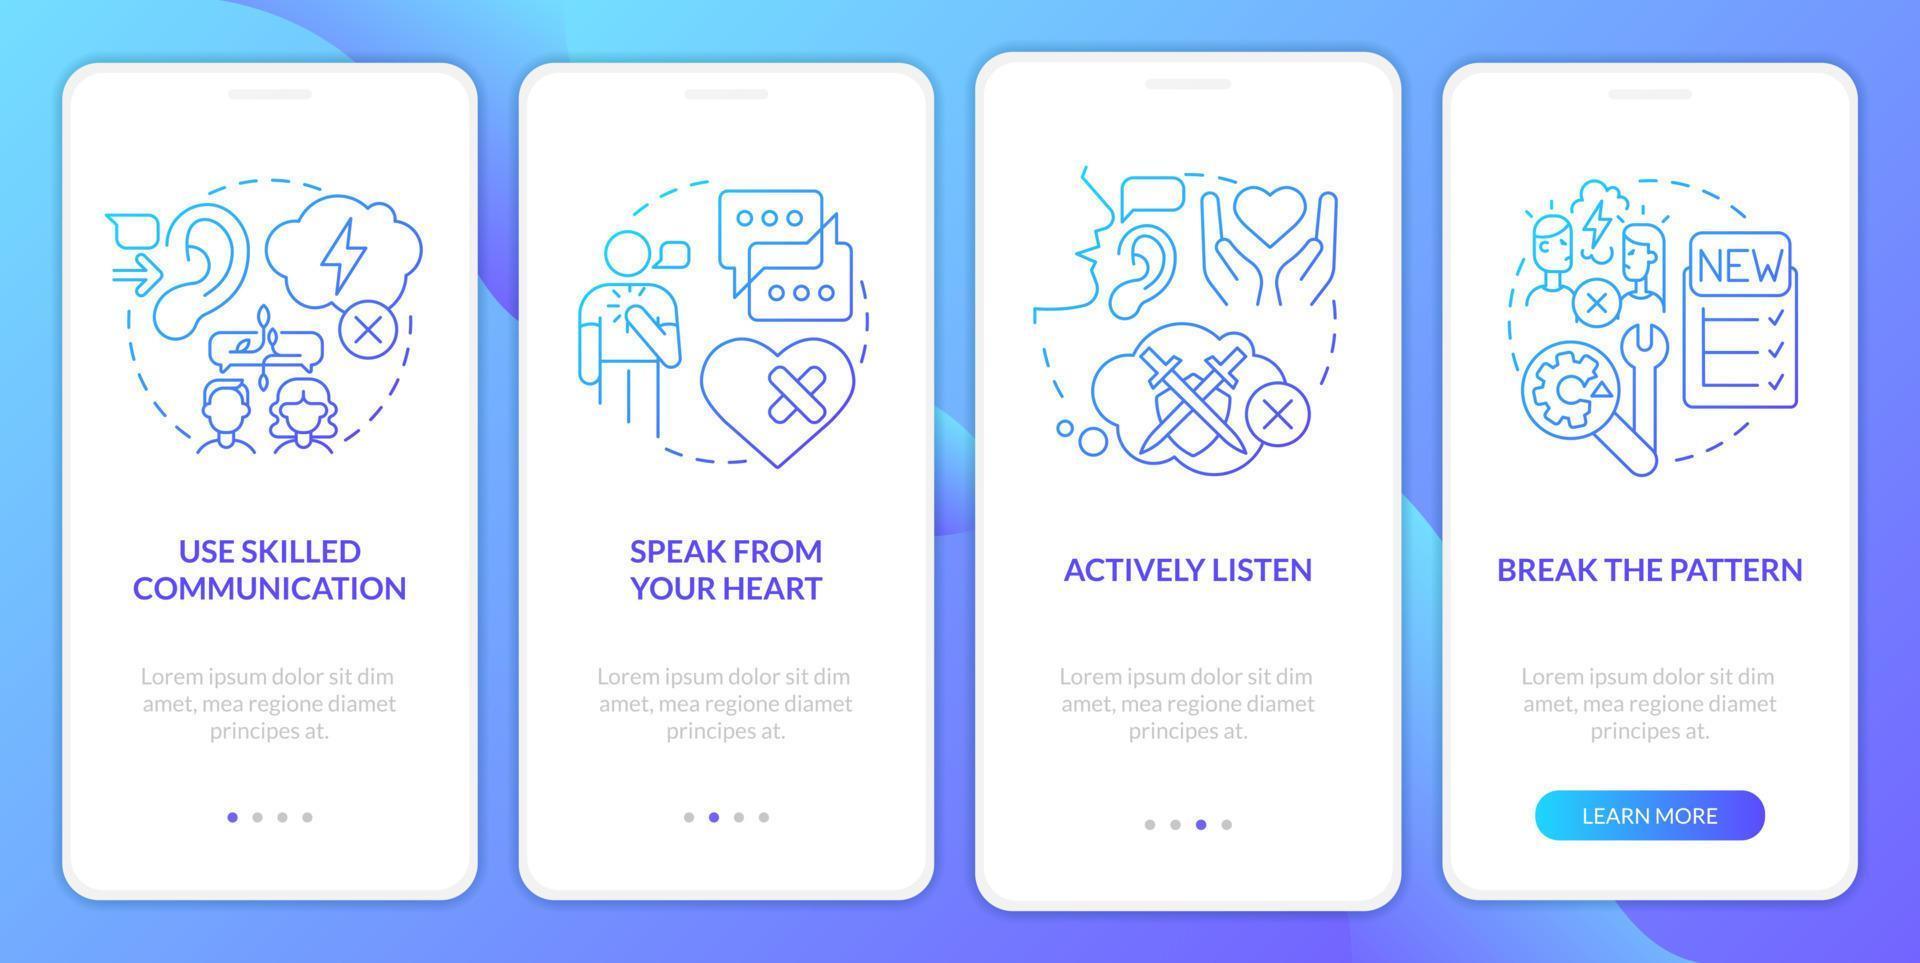 Reconnecting after huge fight blue gradient onboarding mobile app screen vector